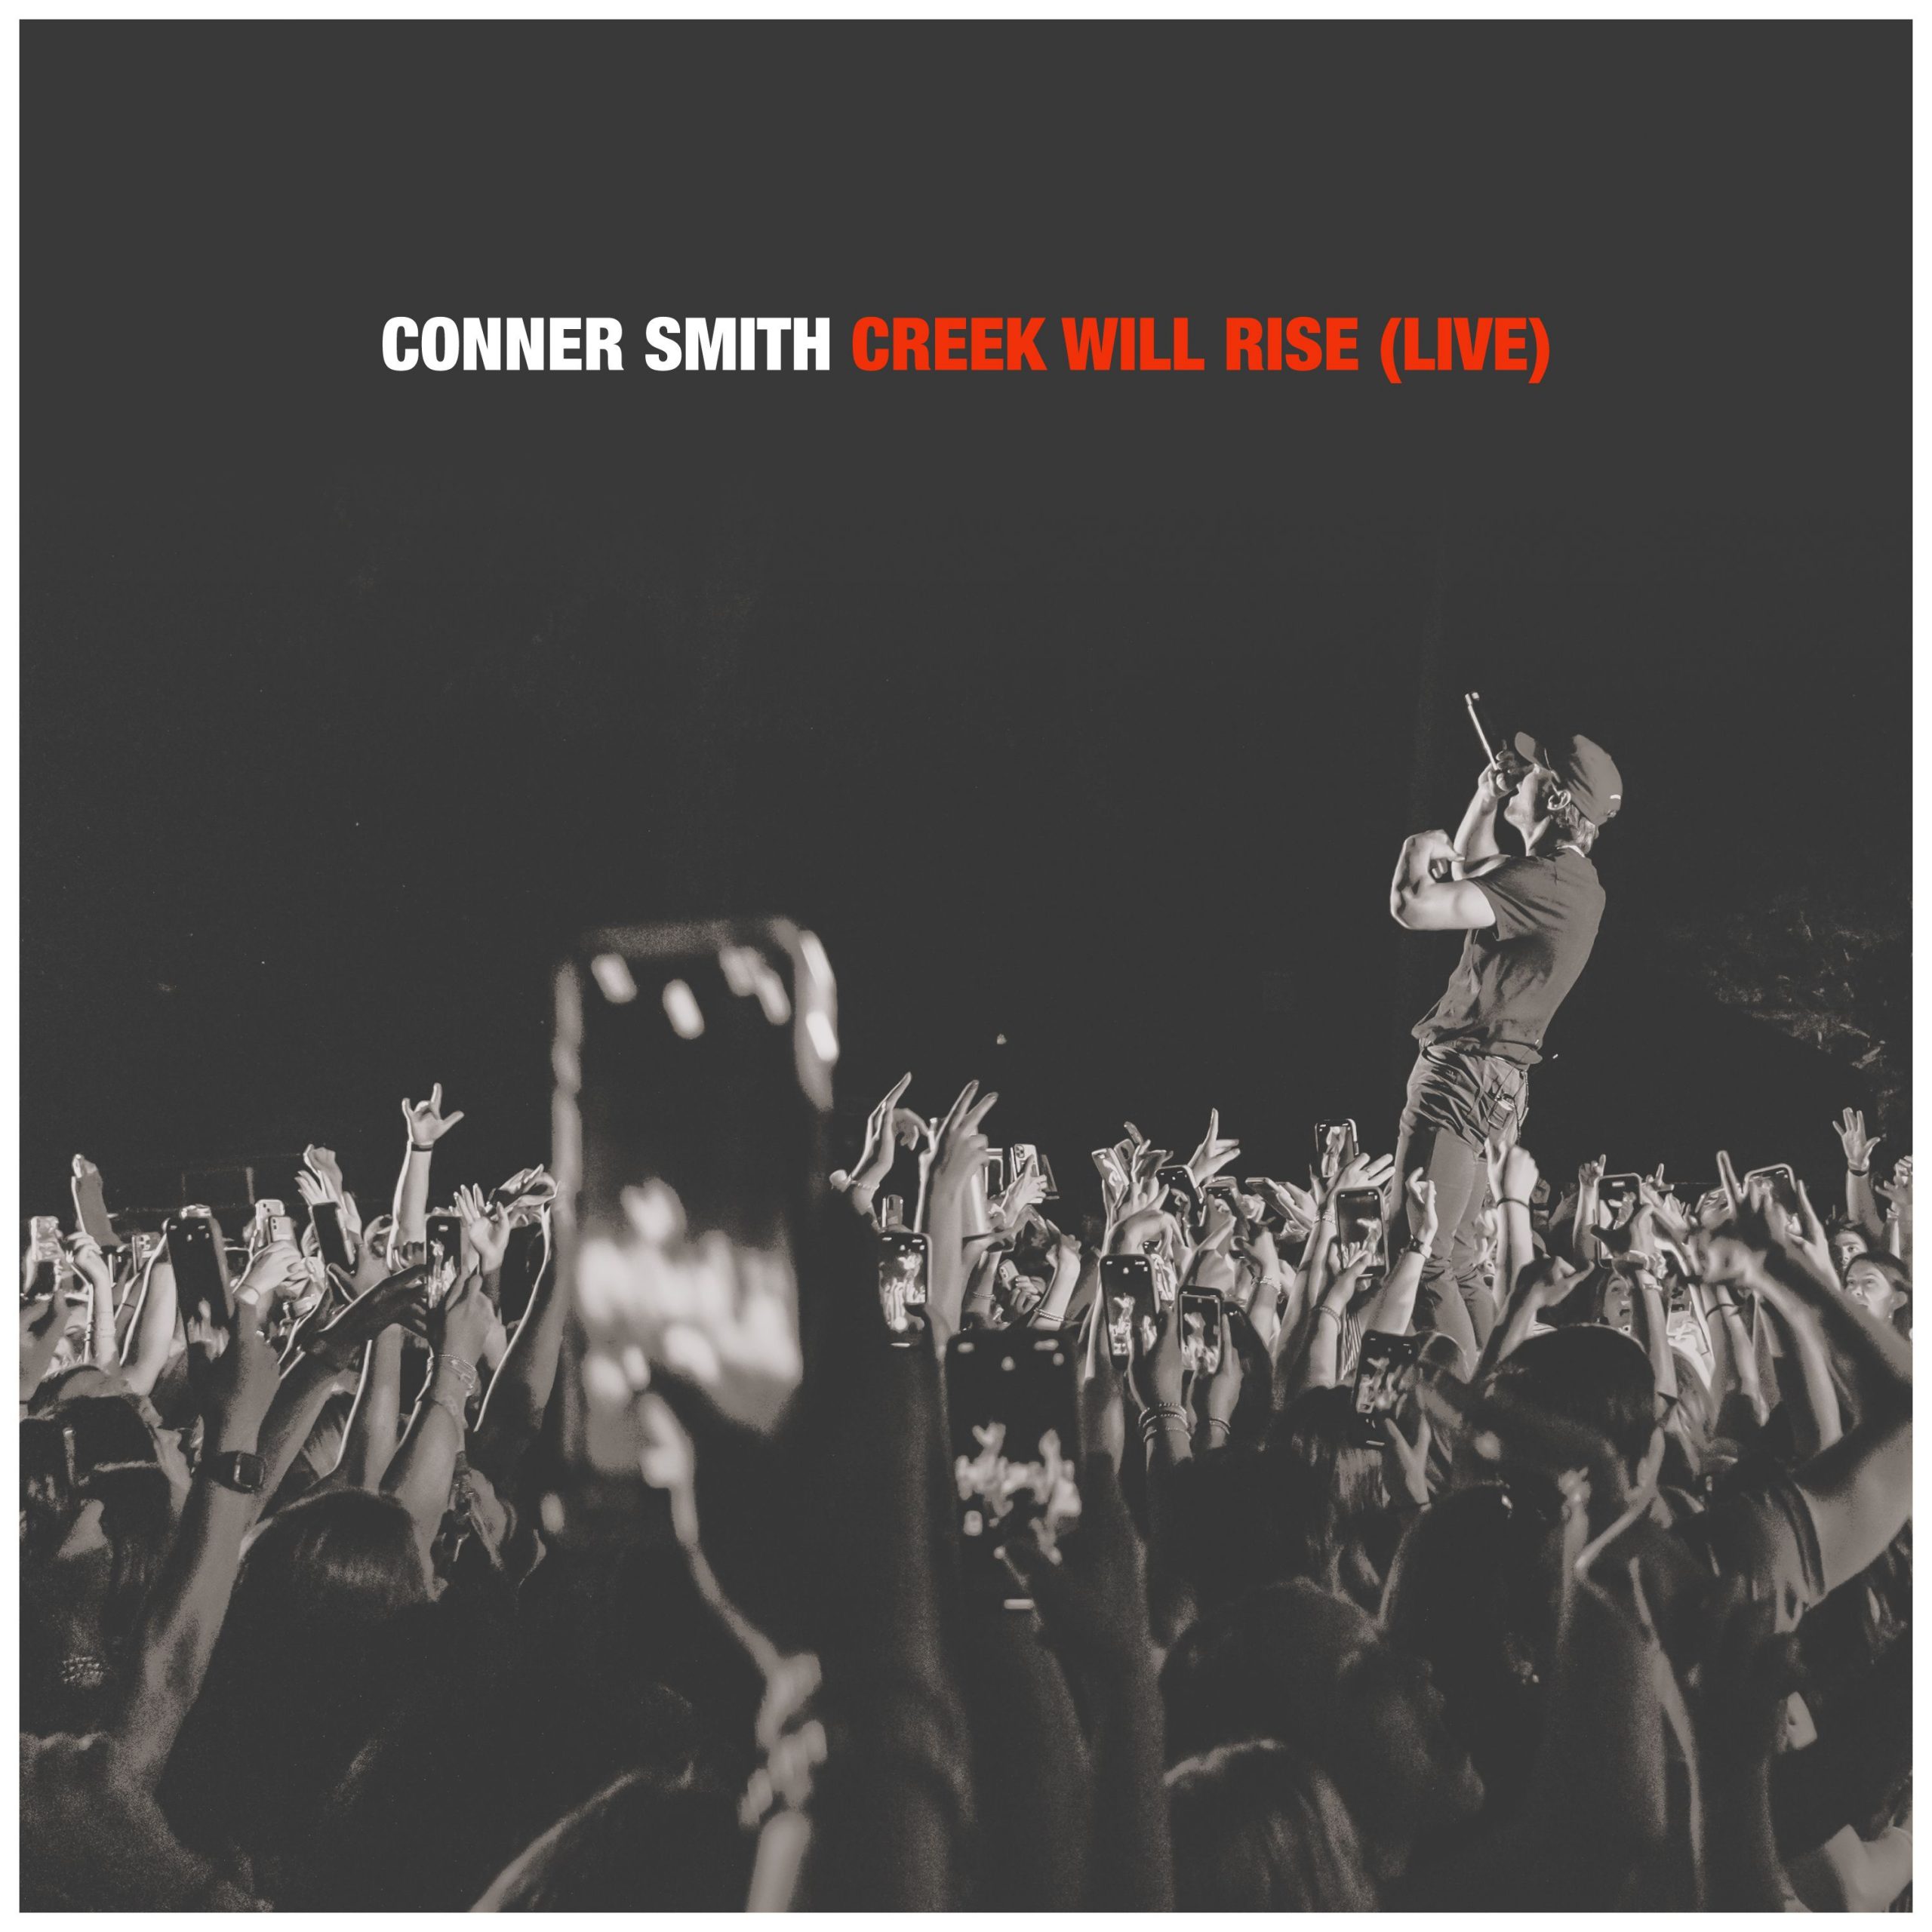 Conner Smith performs 'Creek Will Rise' live on TODAY